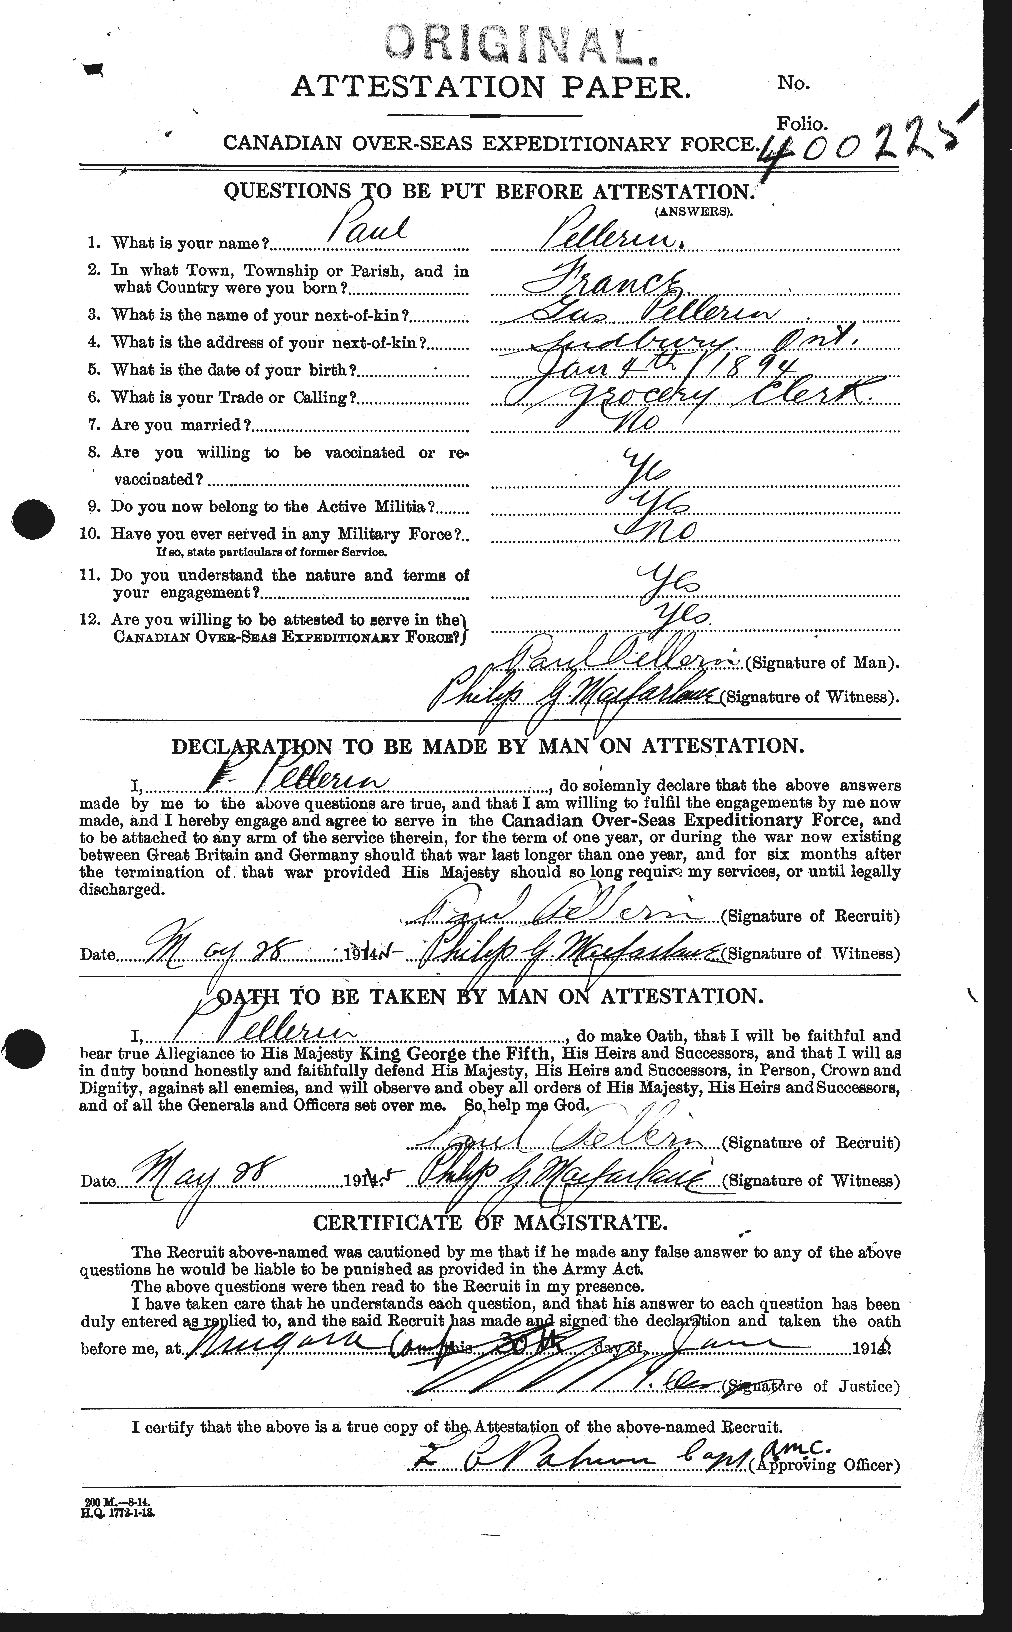 Personnel Records of the First World War - CEF 572266a